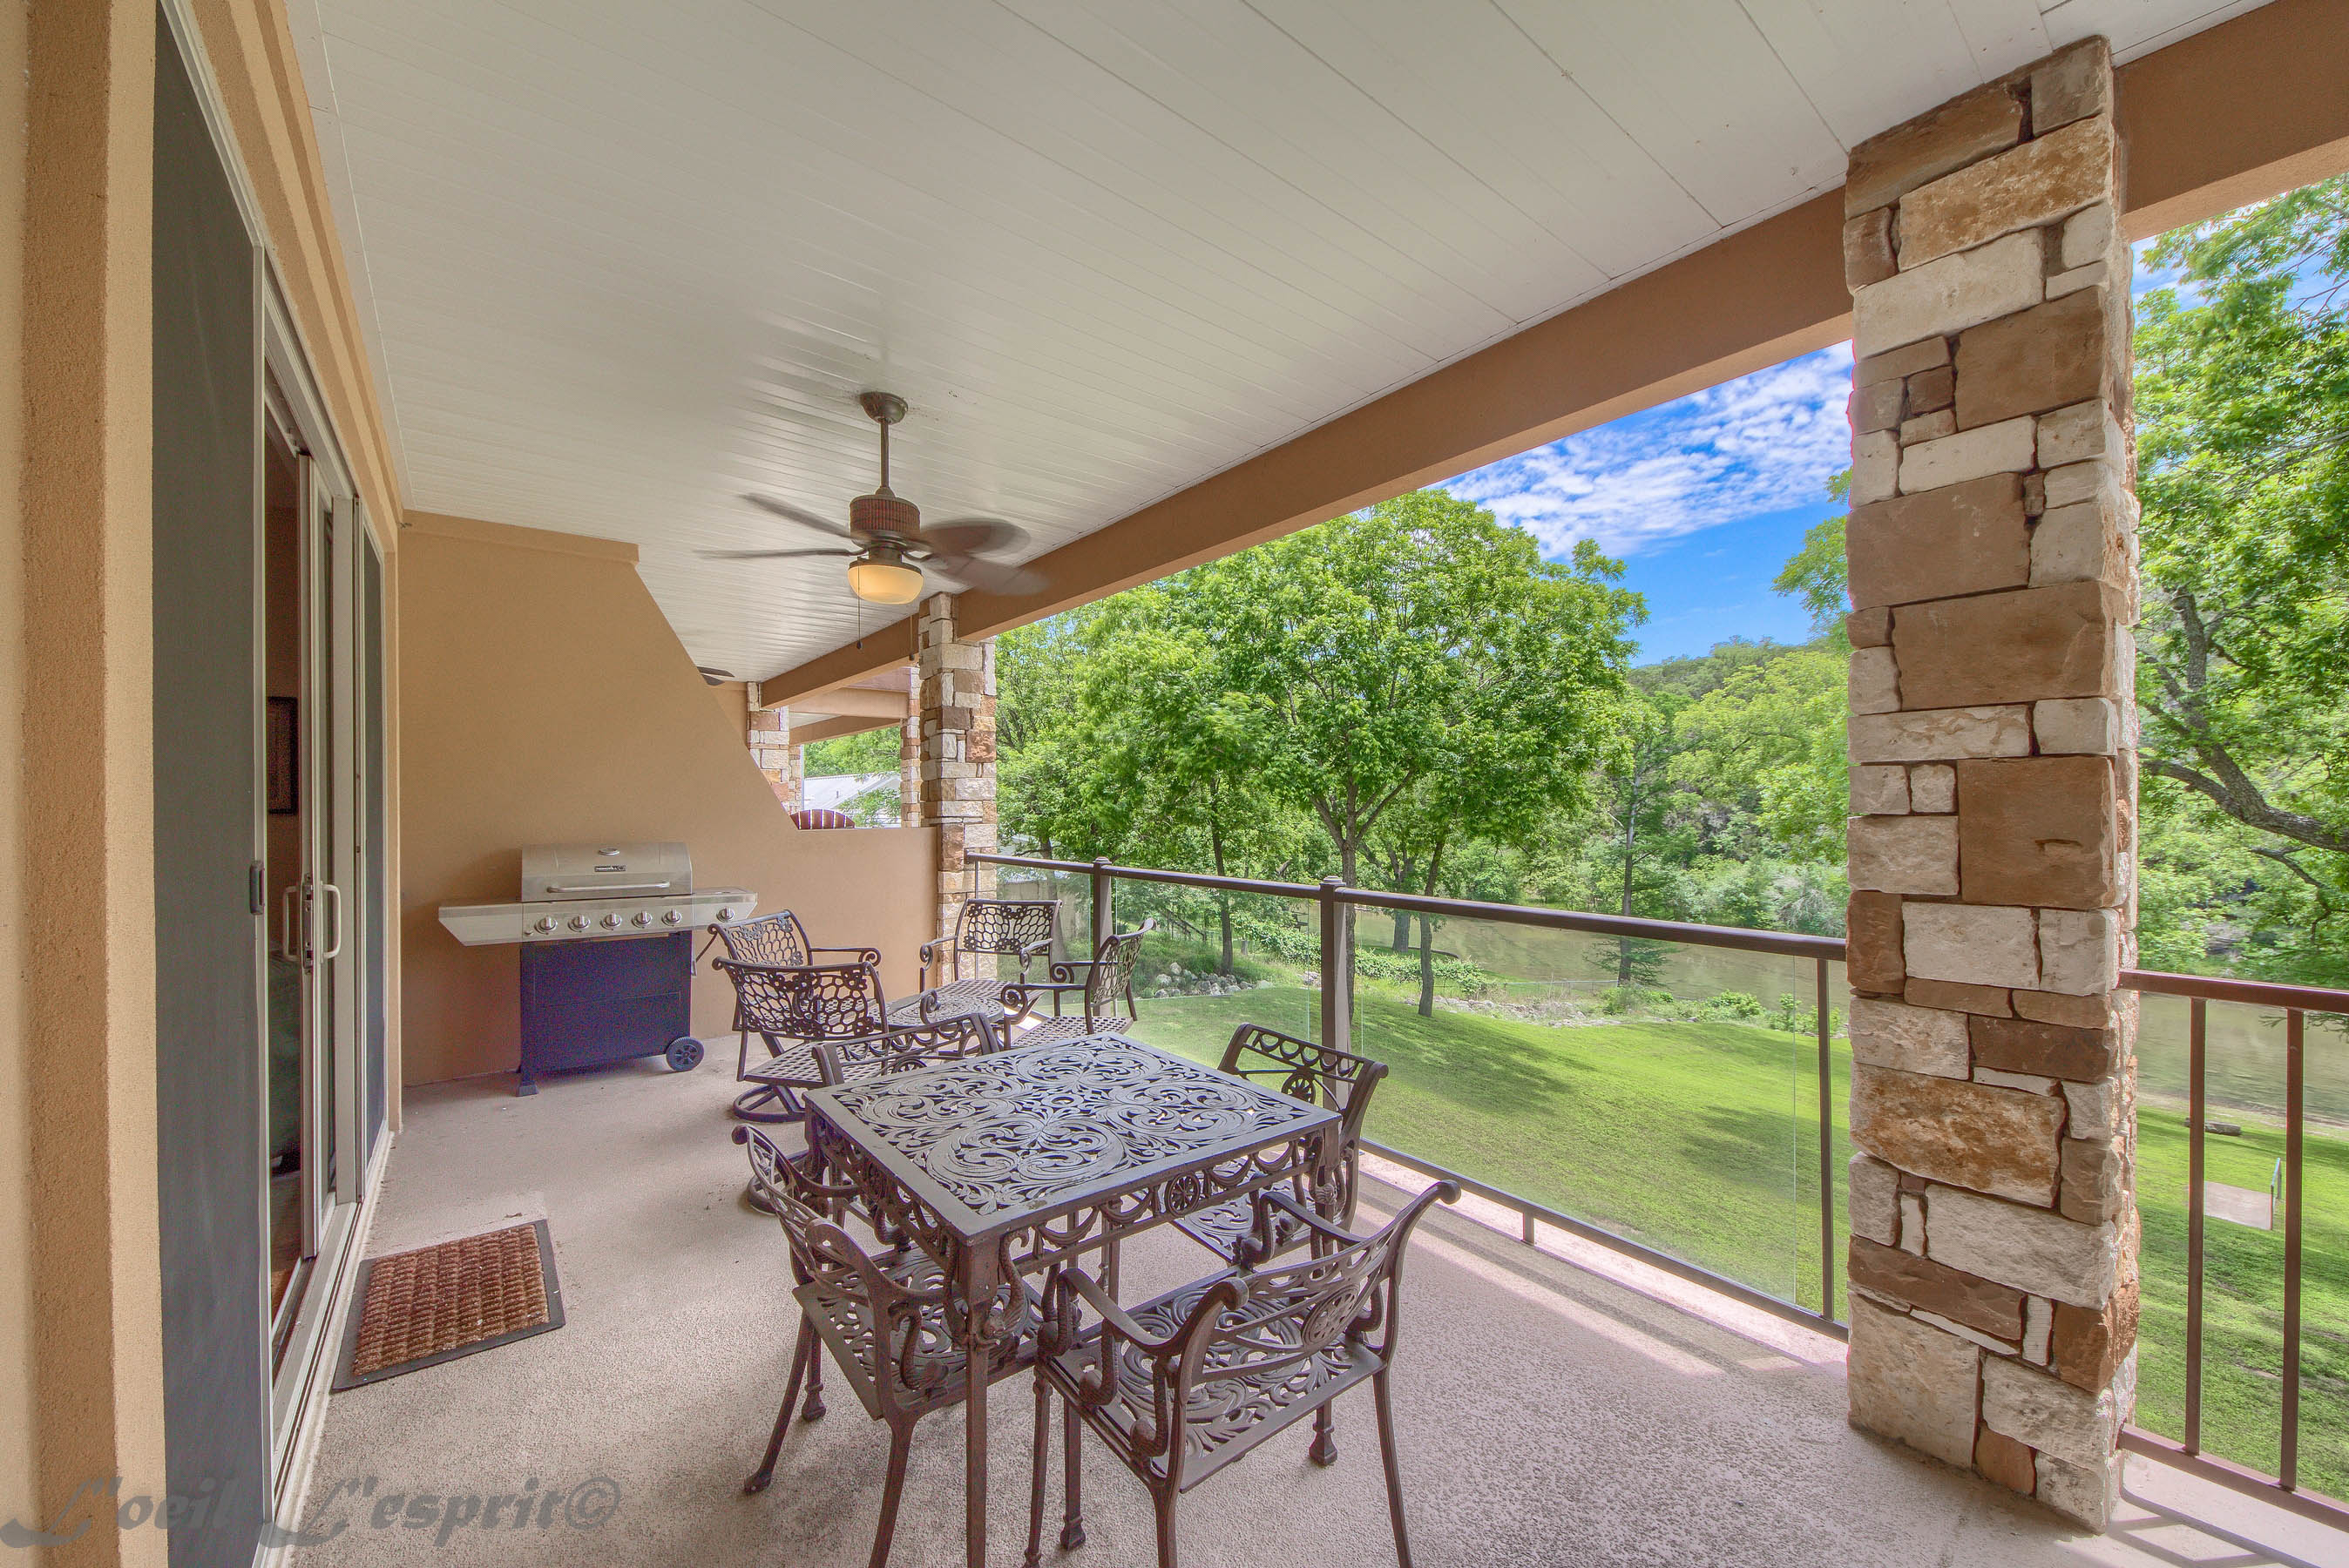 Awesome views from the 2nd floor balcony out to the Guadalupe River!